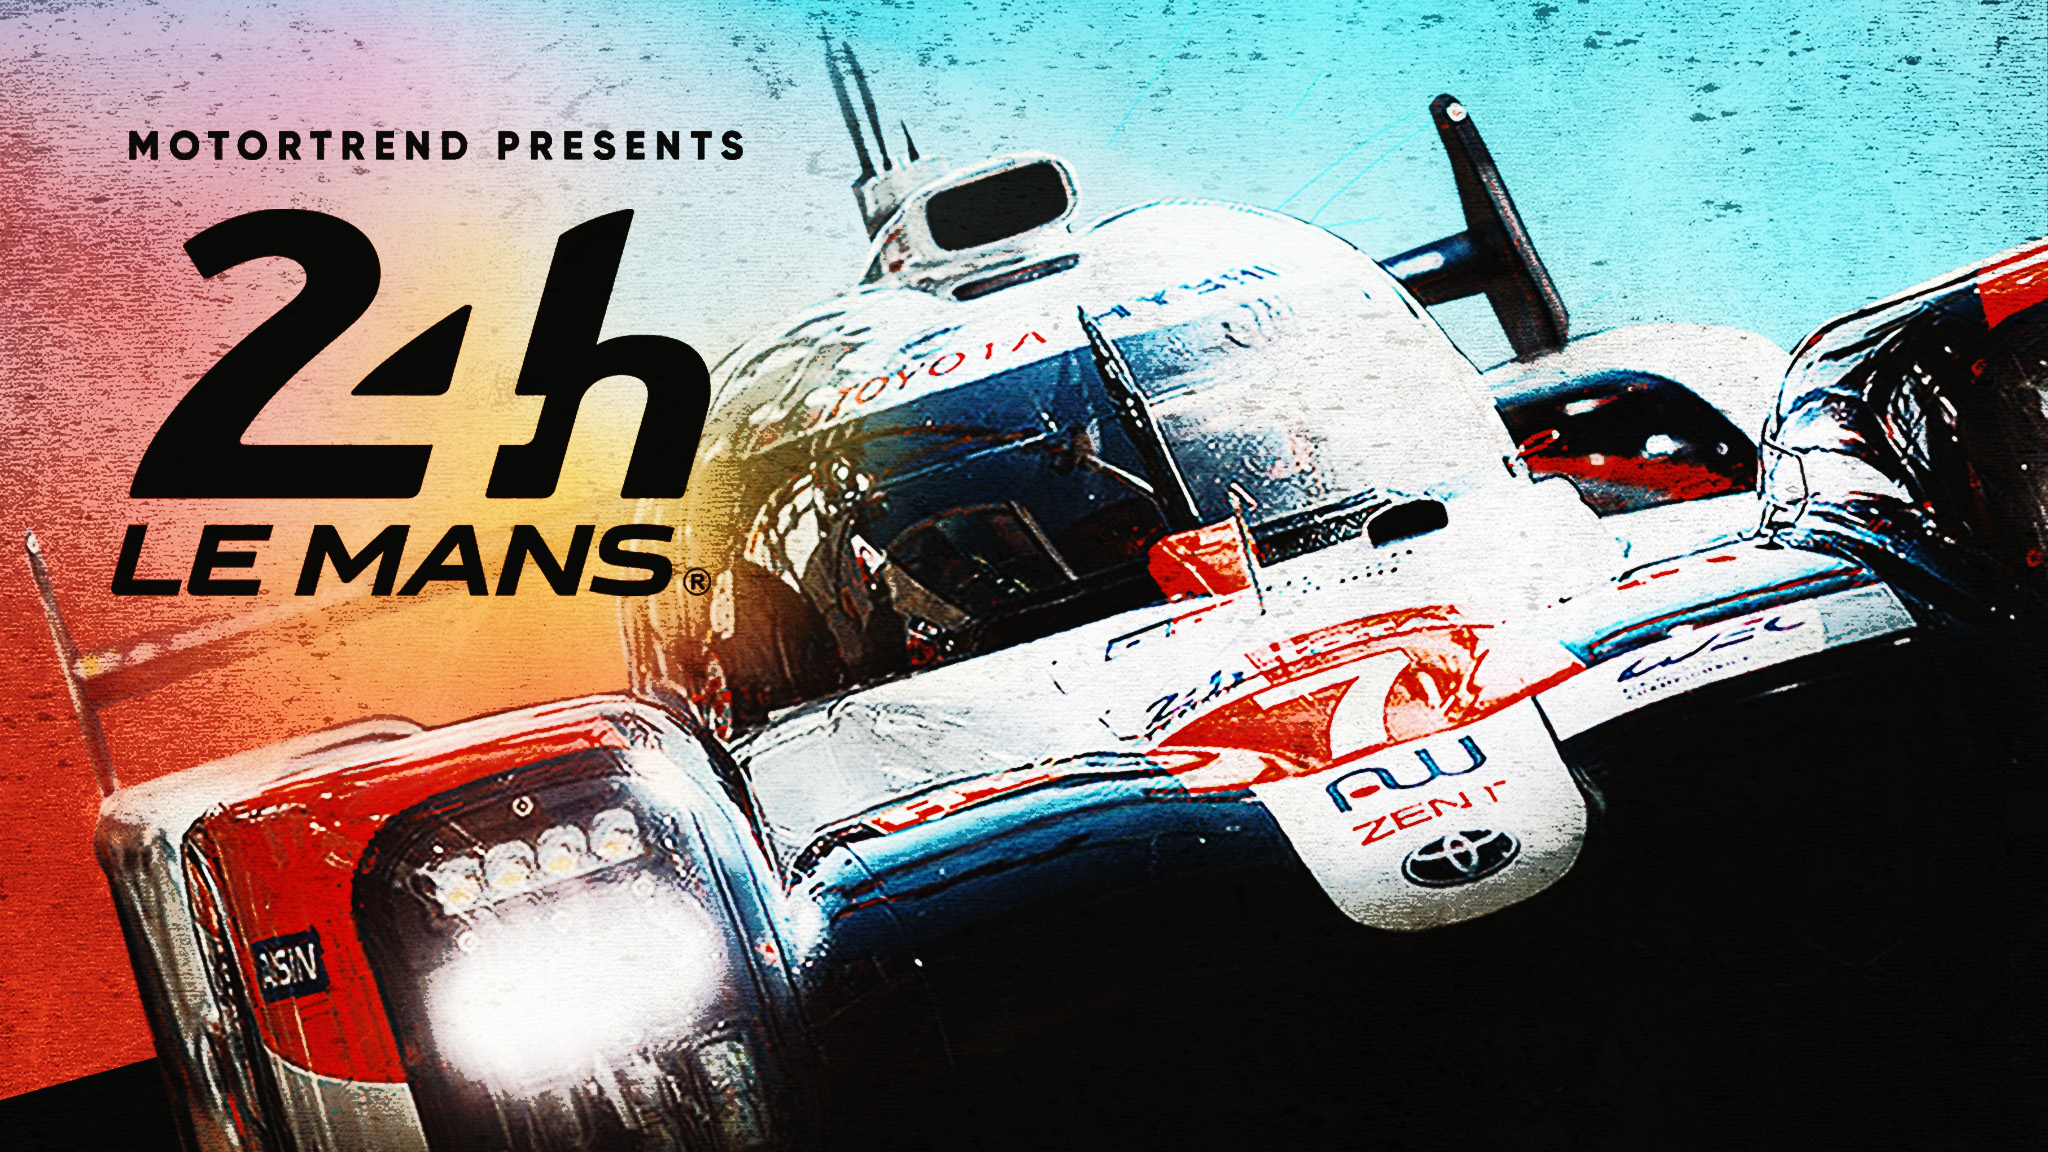 90TH Running of the Most Prestigious Automotive Race, the 24 Hours of Le Mans, Exclusively Comes to MotorTrend+ and MotorTrend TV Live Starting June 11 Warner Bros